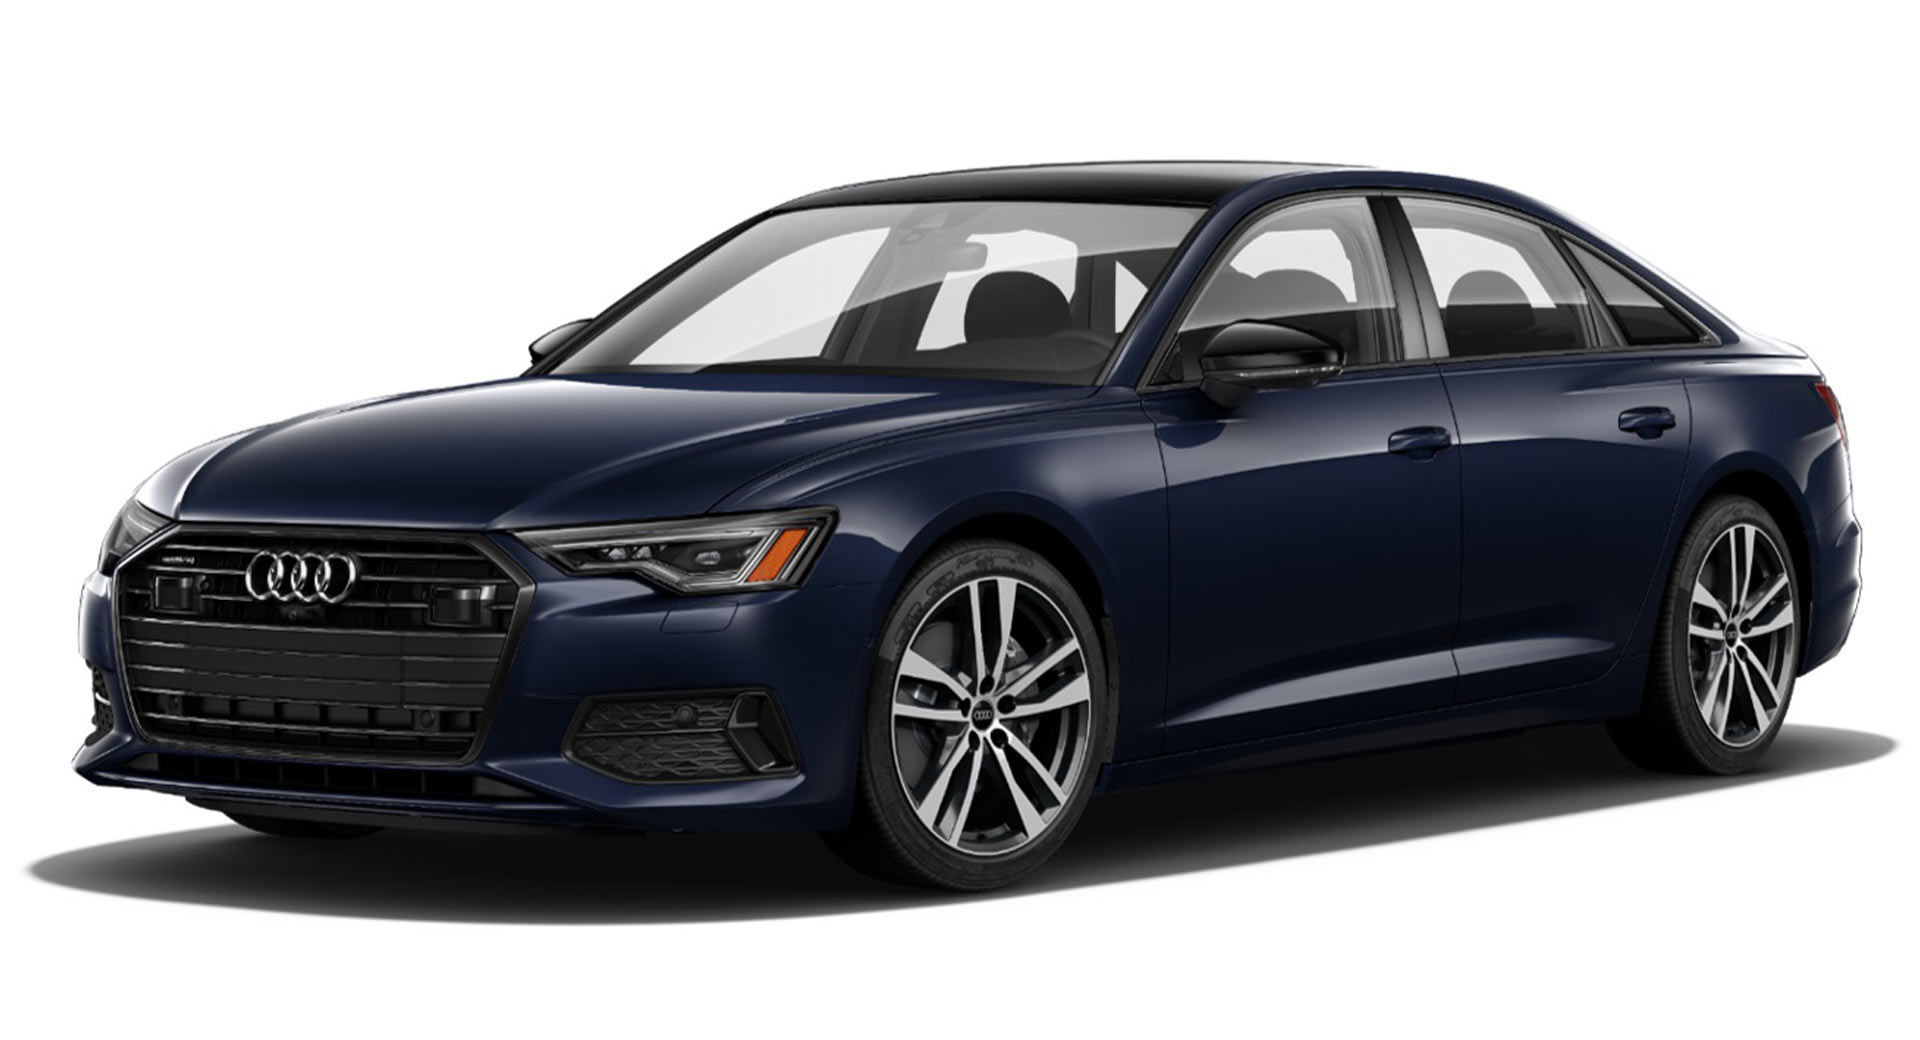 2021 Audi A6 Sport Introduced With More Power And Standard Black Optic  Package | Carscoops